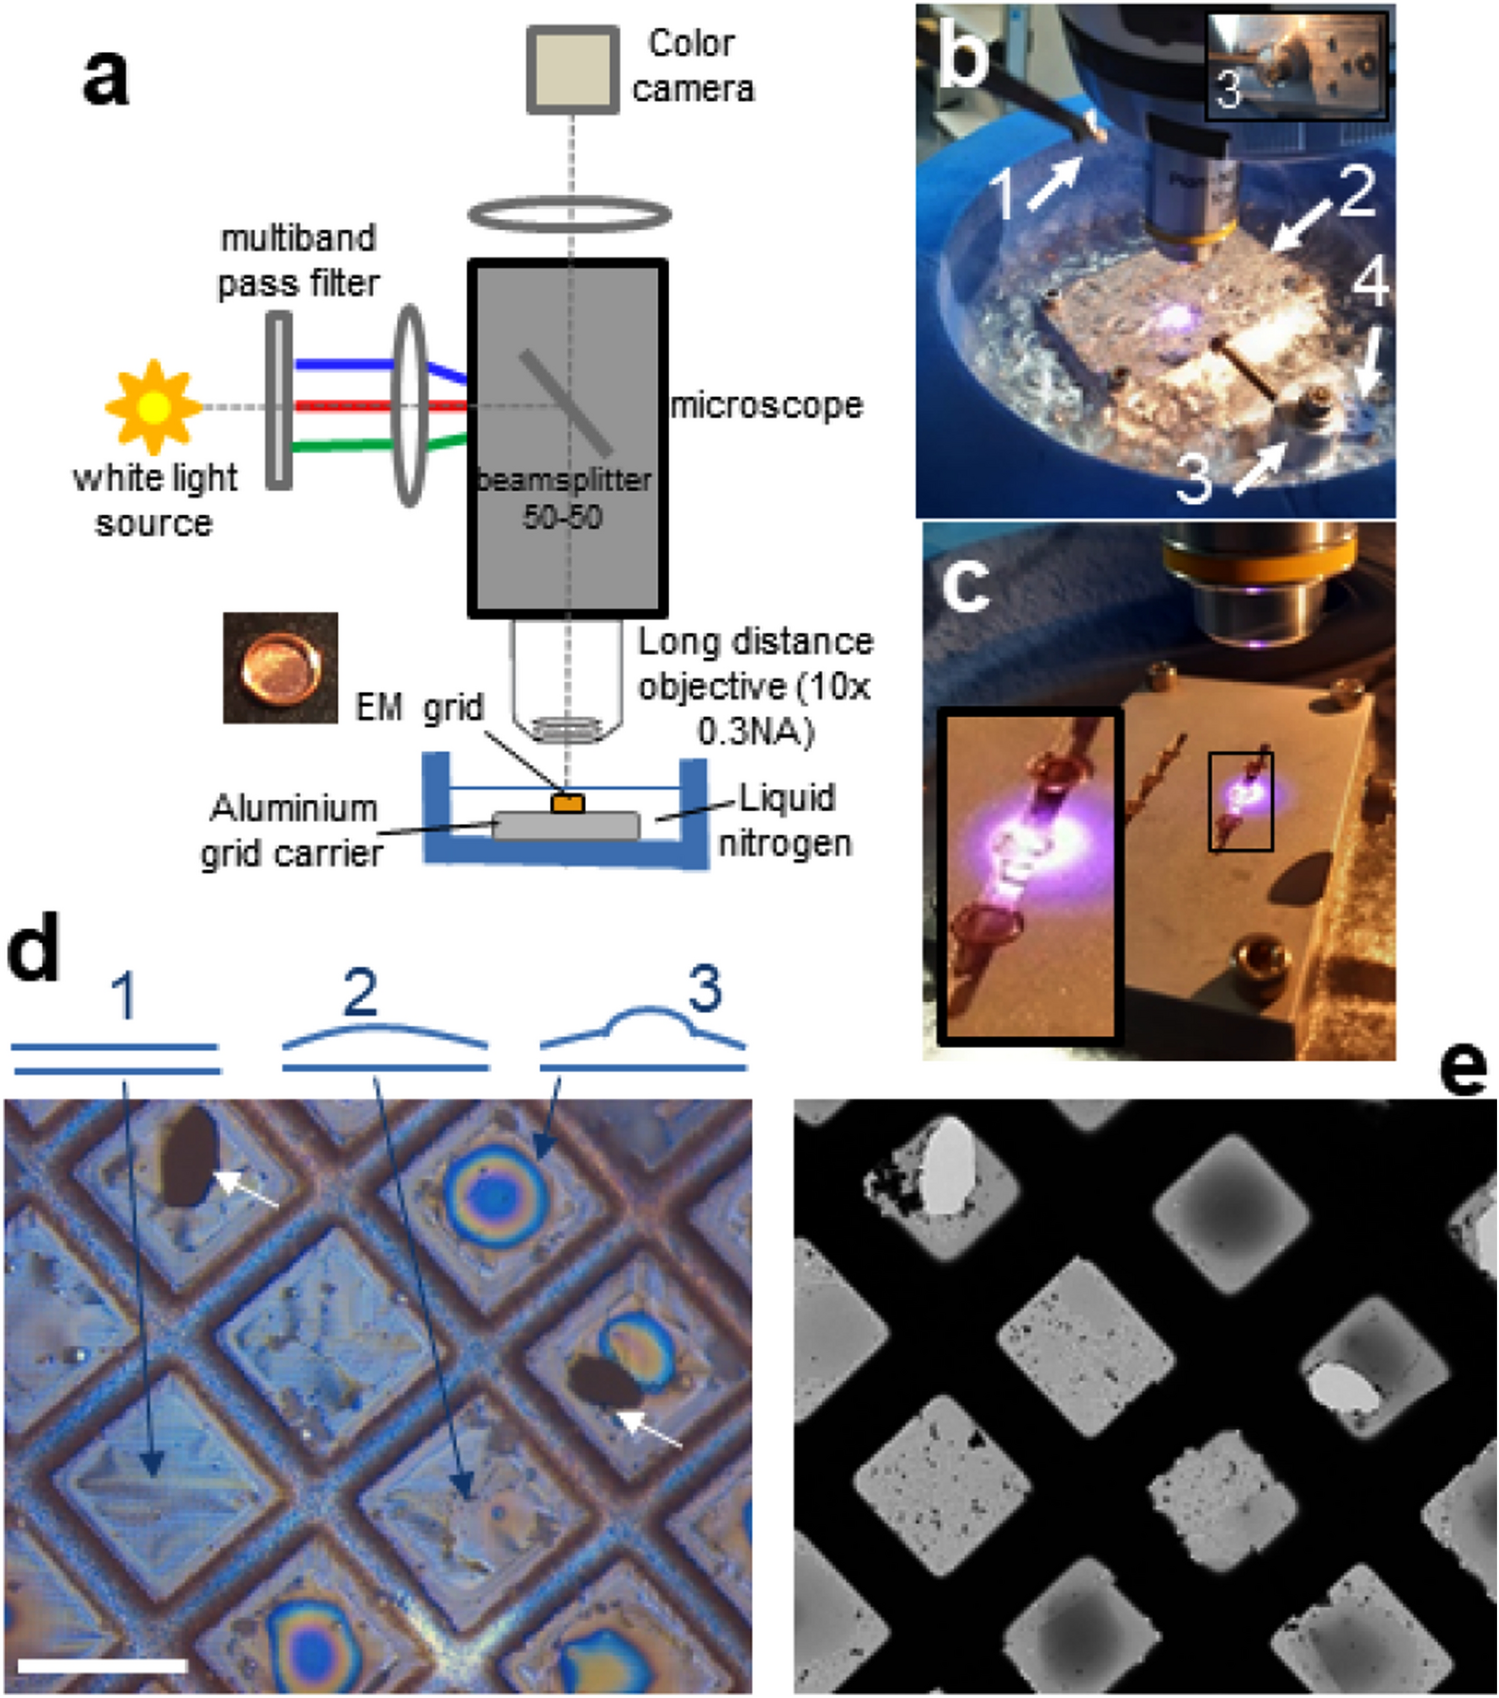 Ice thickness monitoring for cryo-EM grids by interferometry